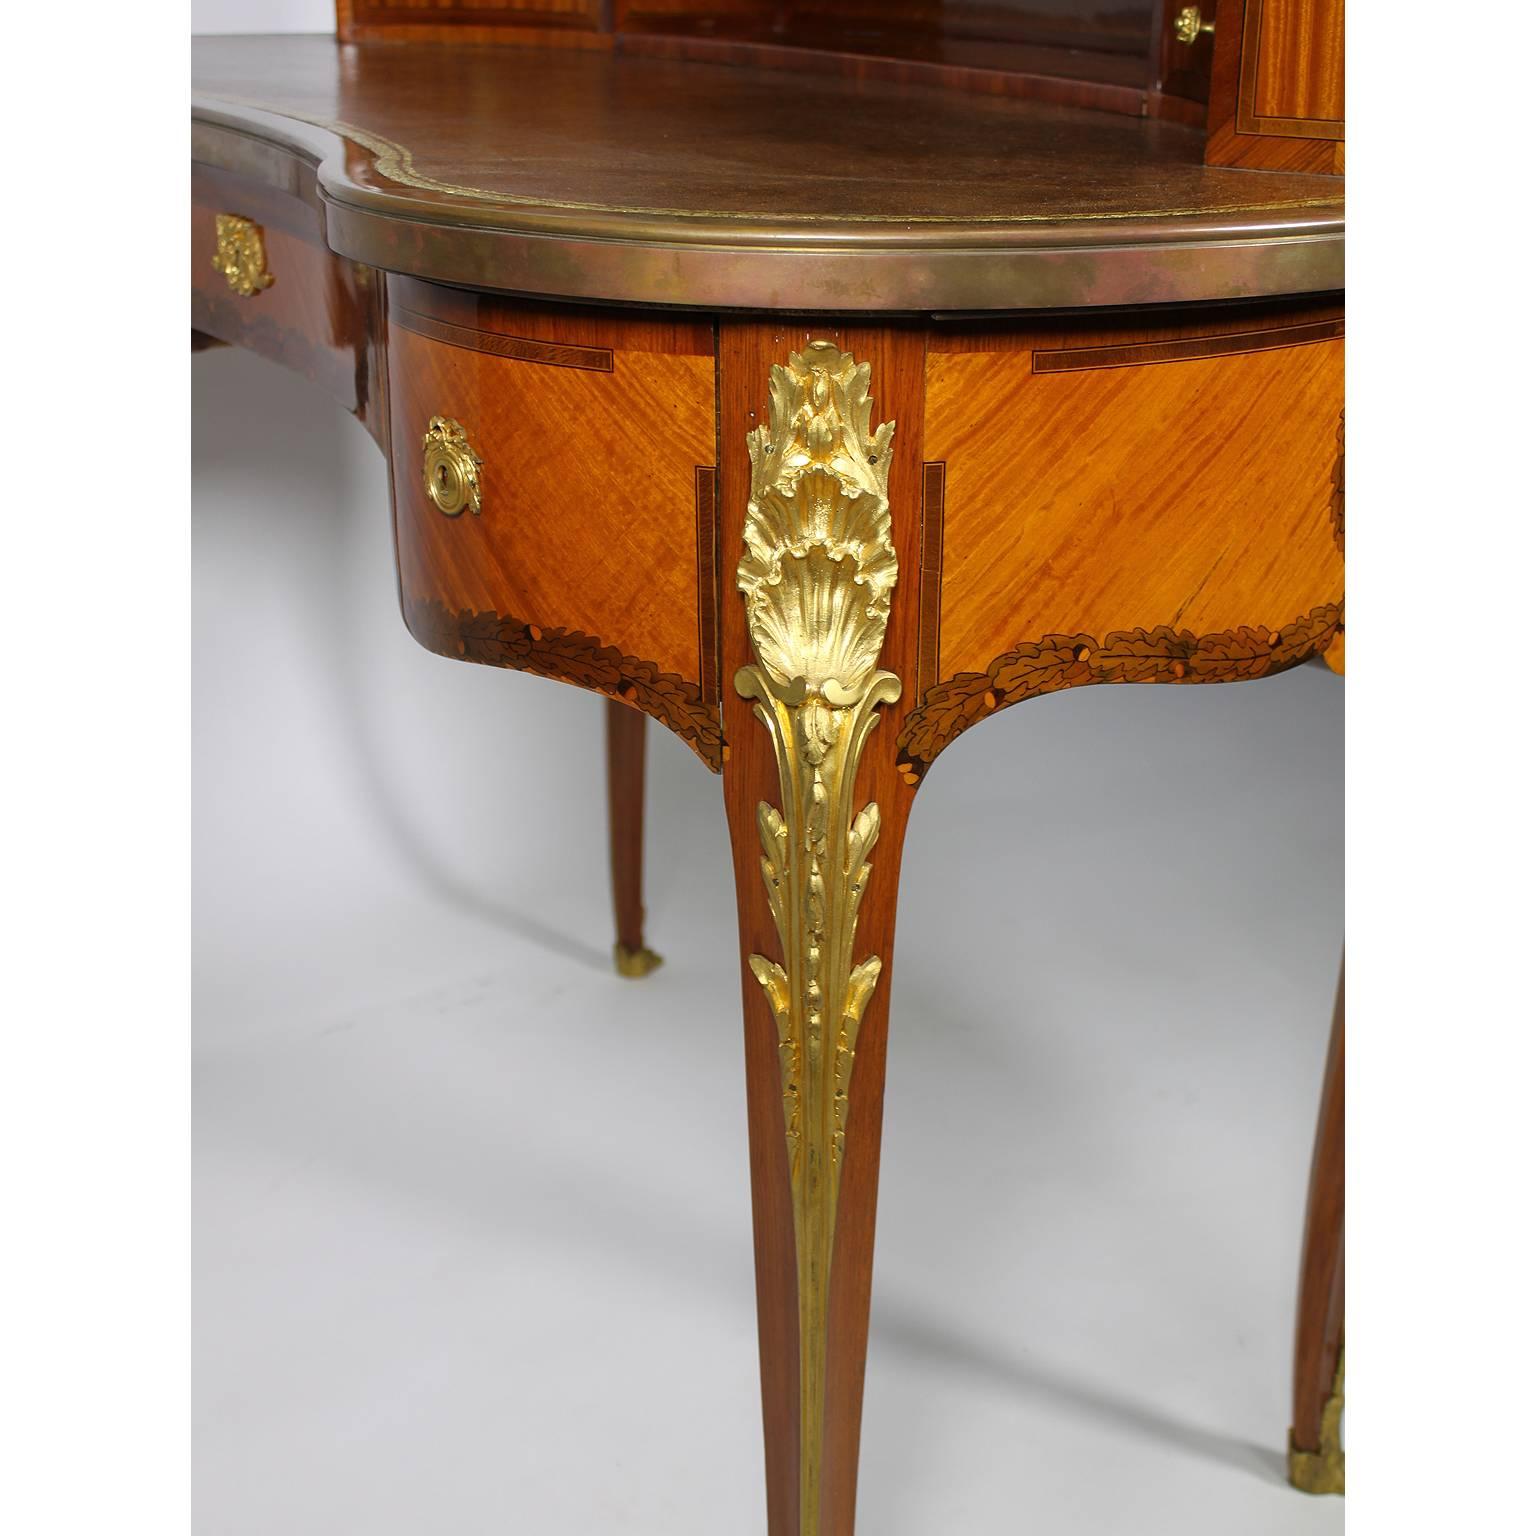 Fine French 19th Century Louis XV Style Tulipwood and Ormolu-Mounted Ladies Desk For Sale 4